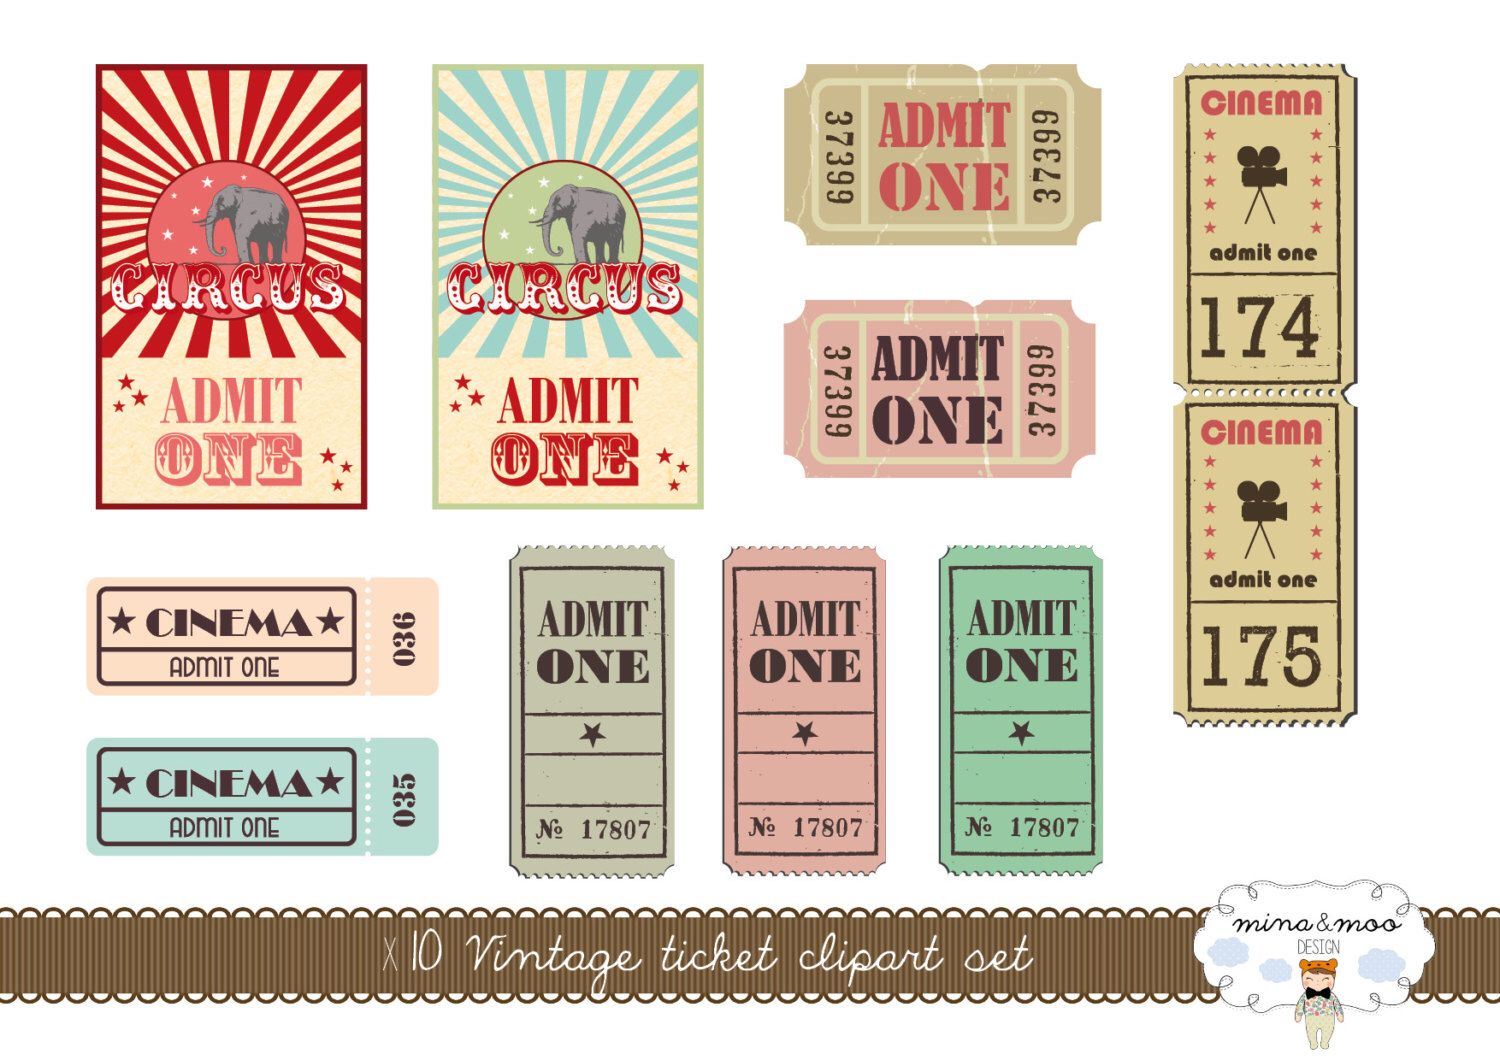 tickets clipart vintage